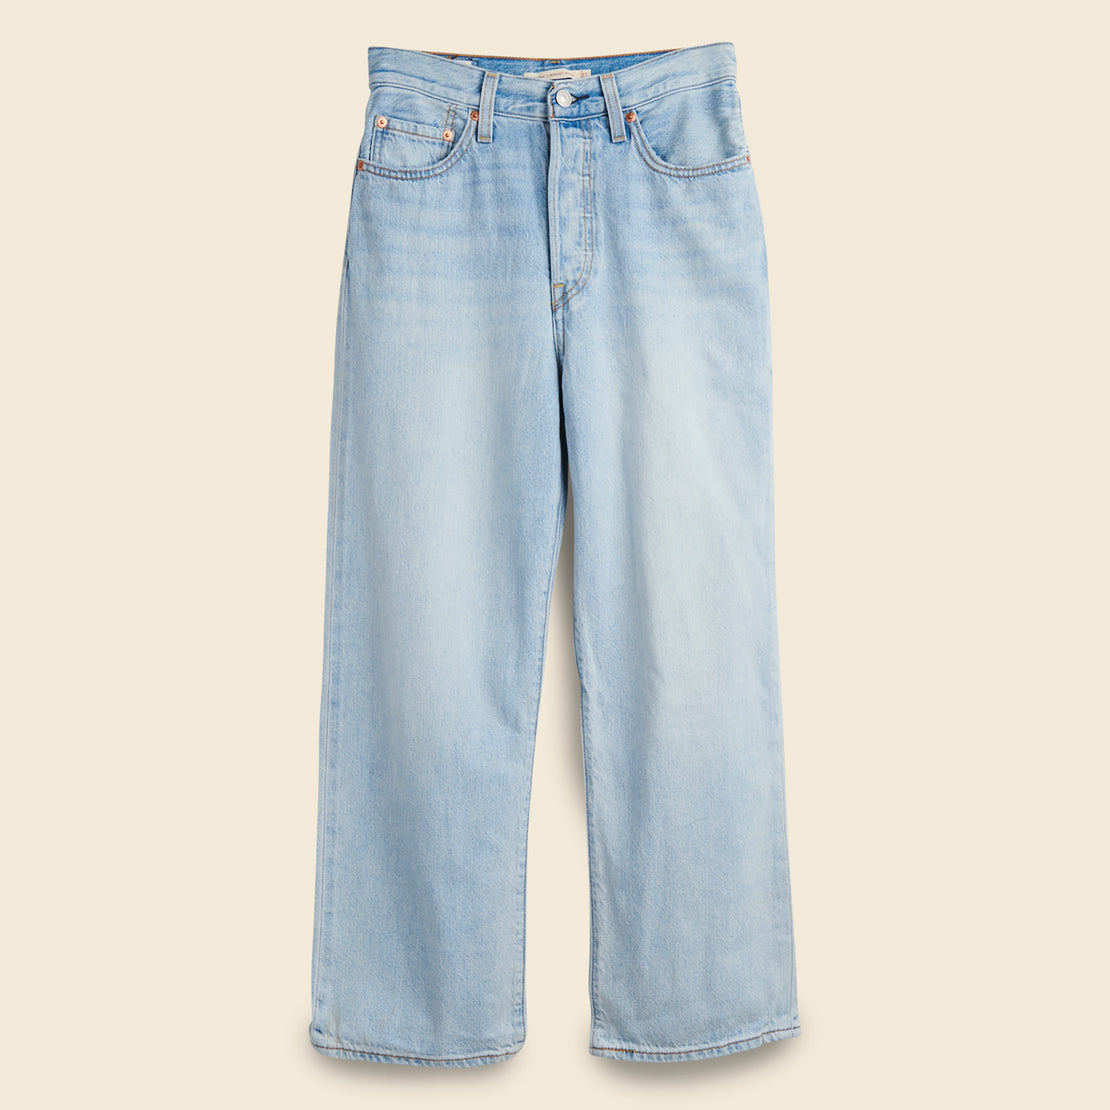 Levis Premium Ribcage Straight Ankle Jean - Middle Road